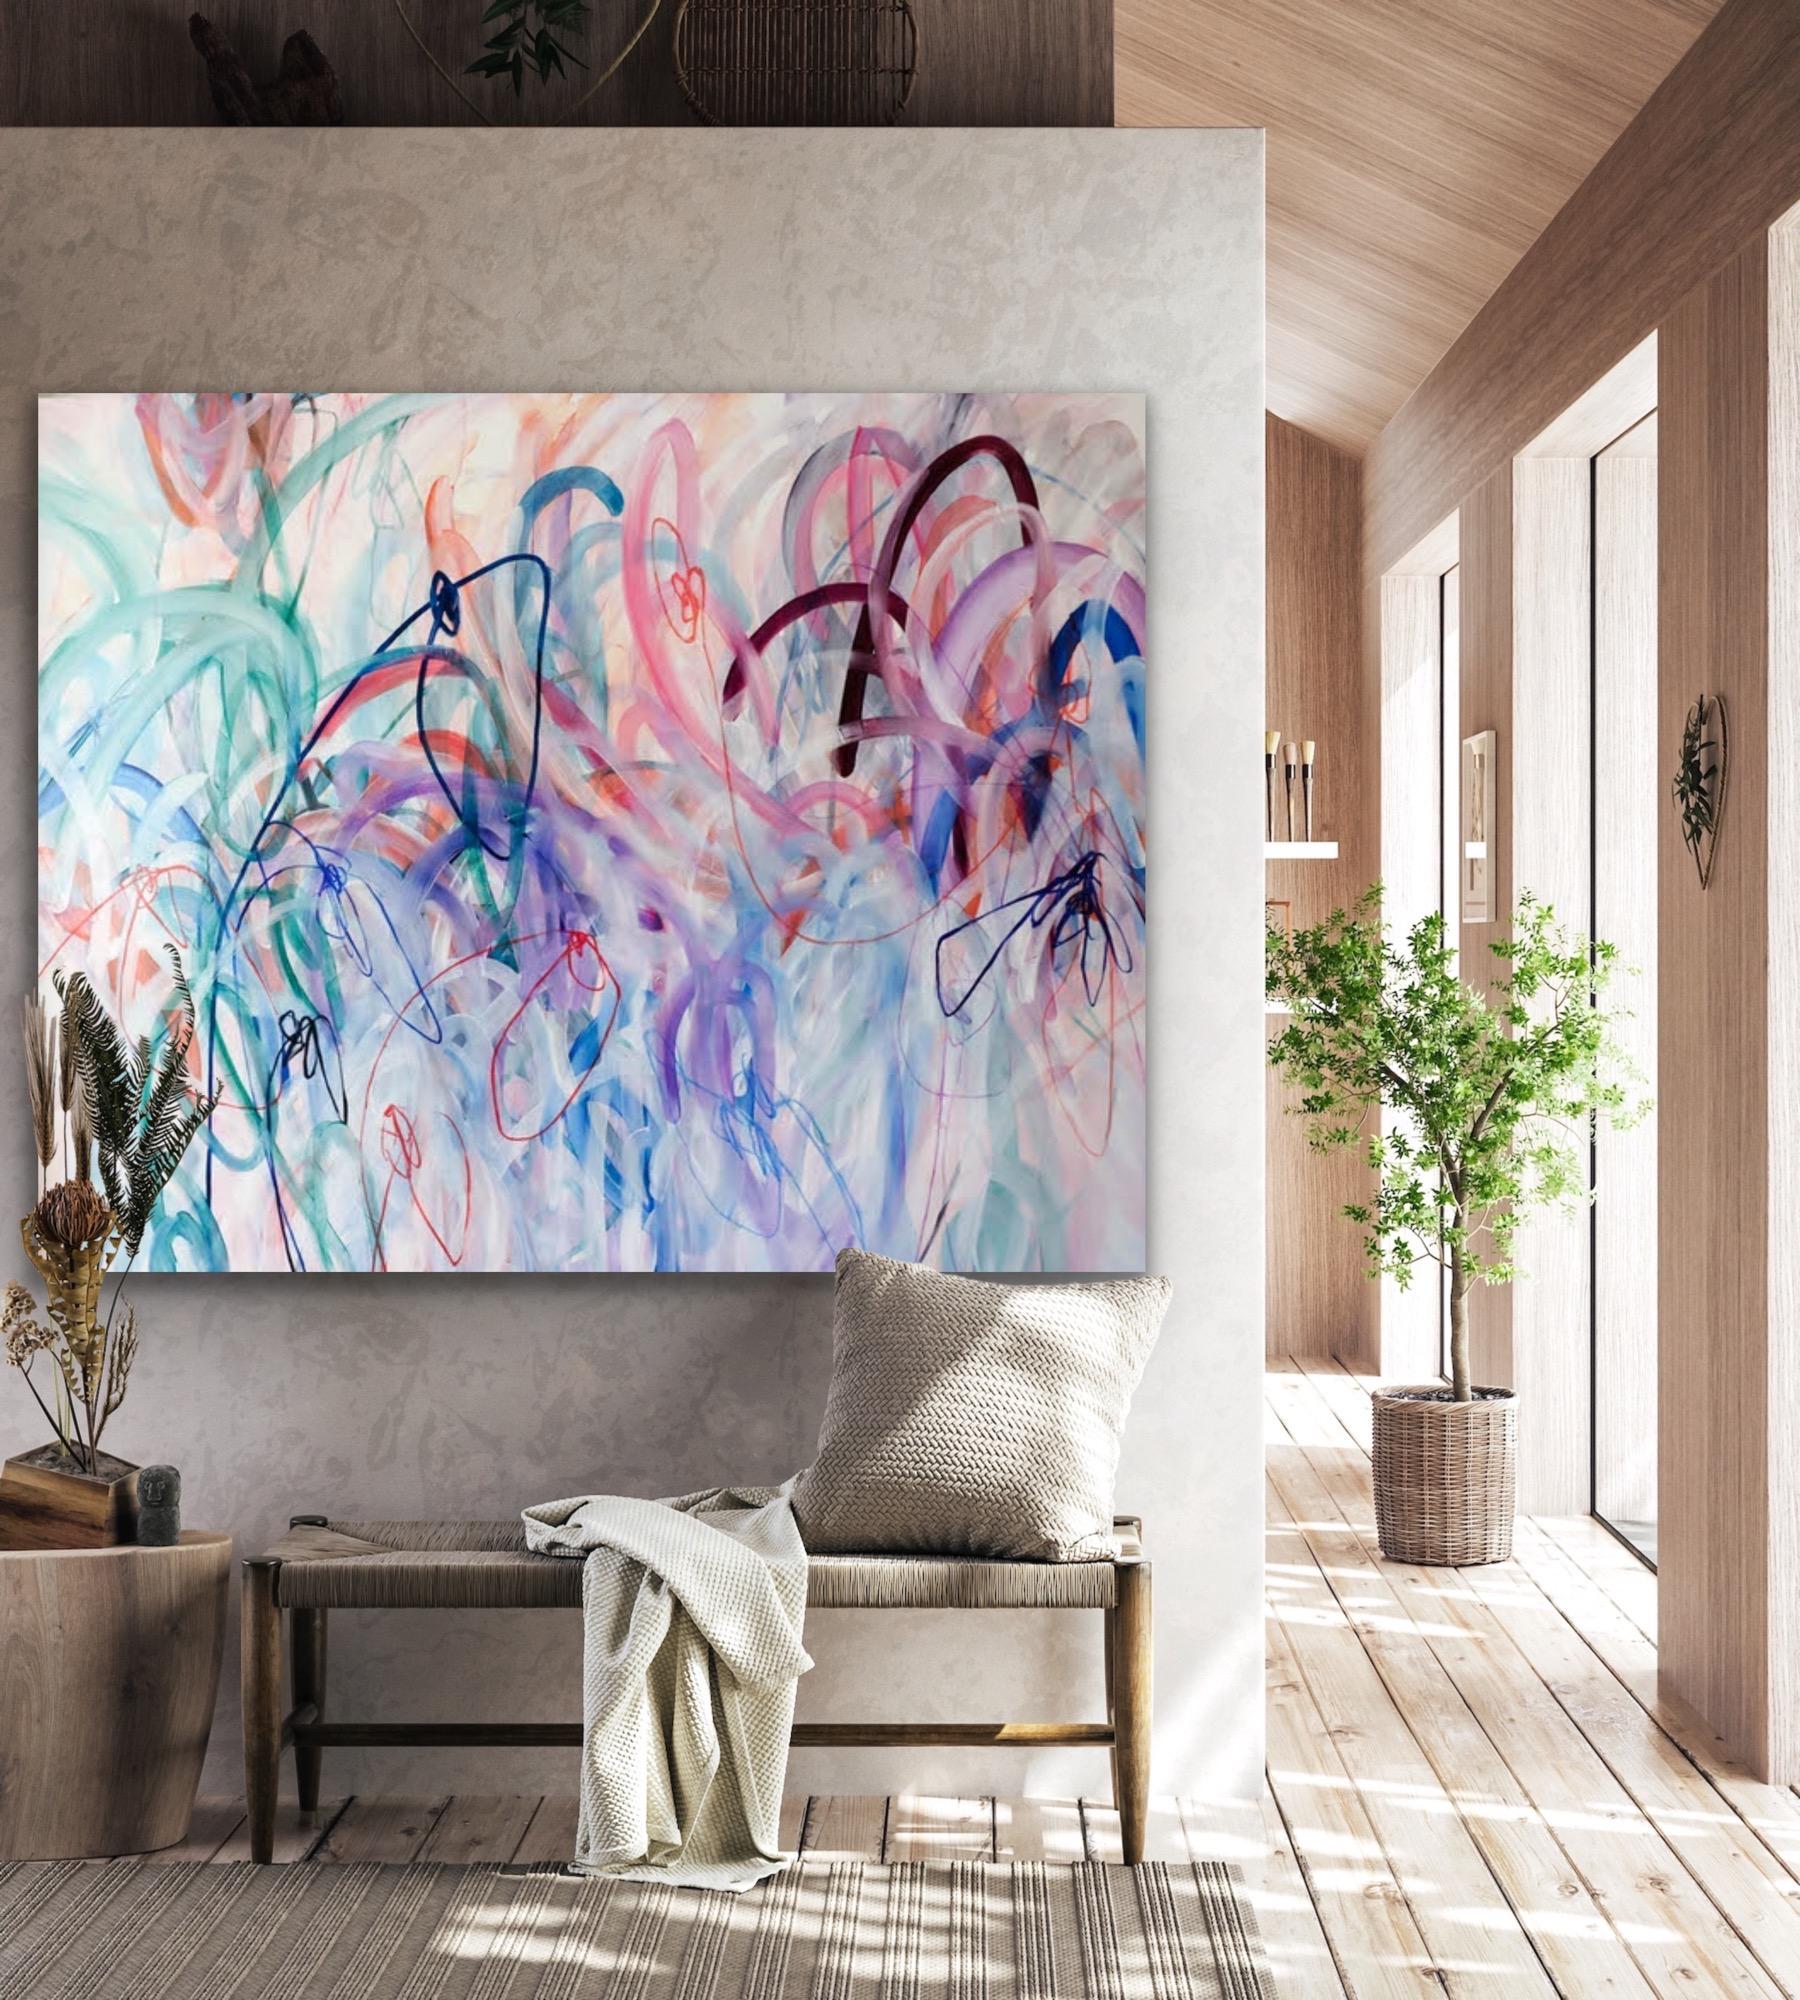 ”Flow of Life”, Oil, Acrylics and Oil Pastel Abstract 120 x 150 cm - Abstract Expressionist Painting by Elin Kereby